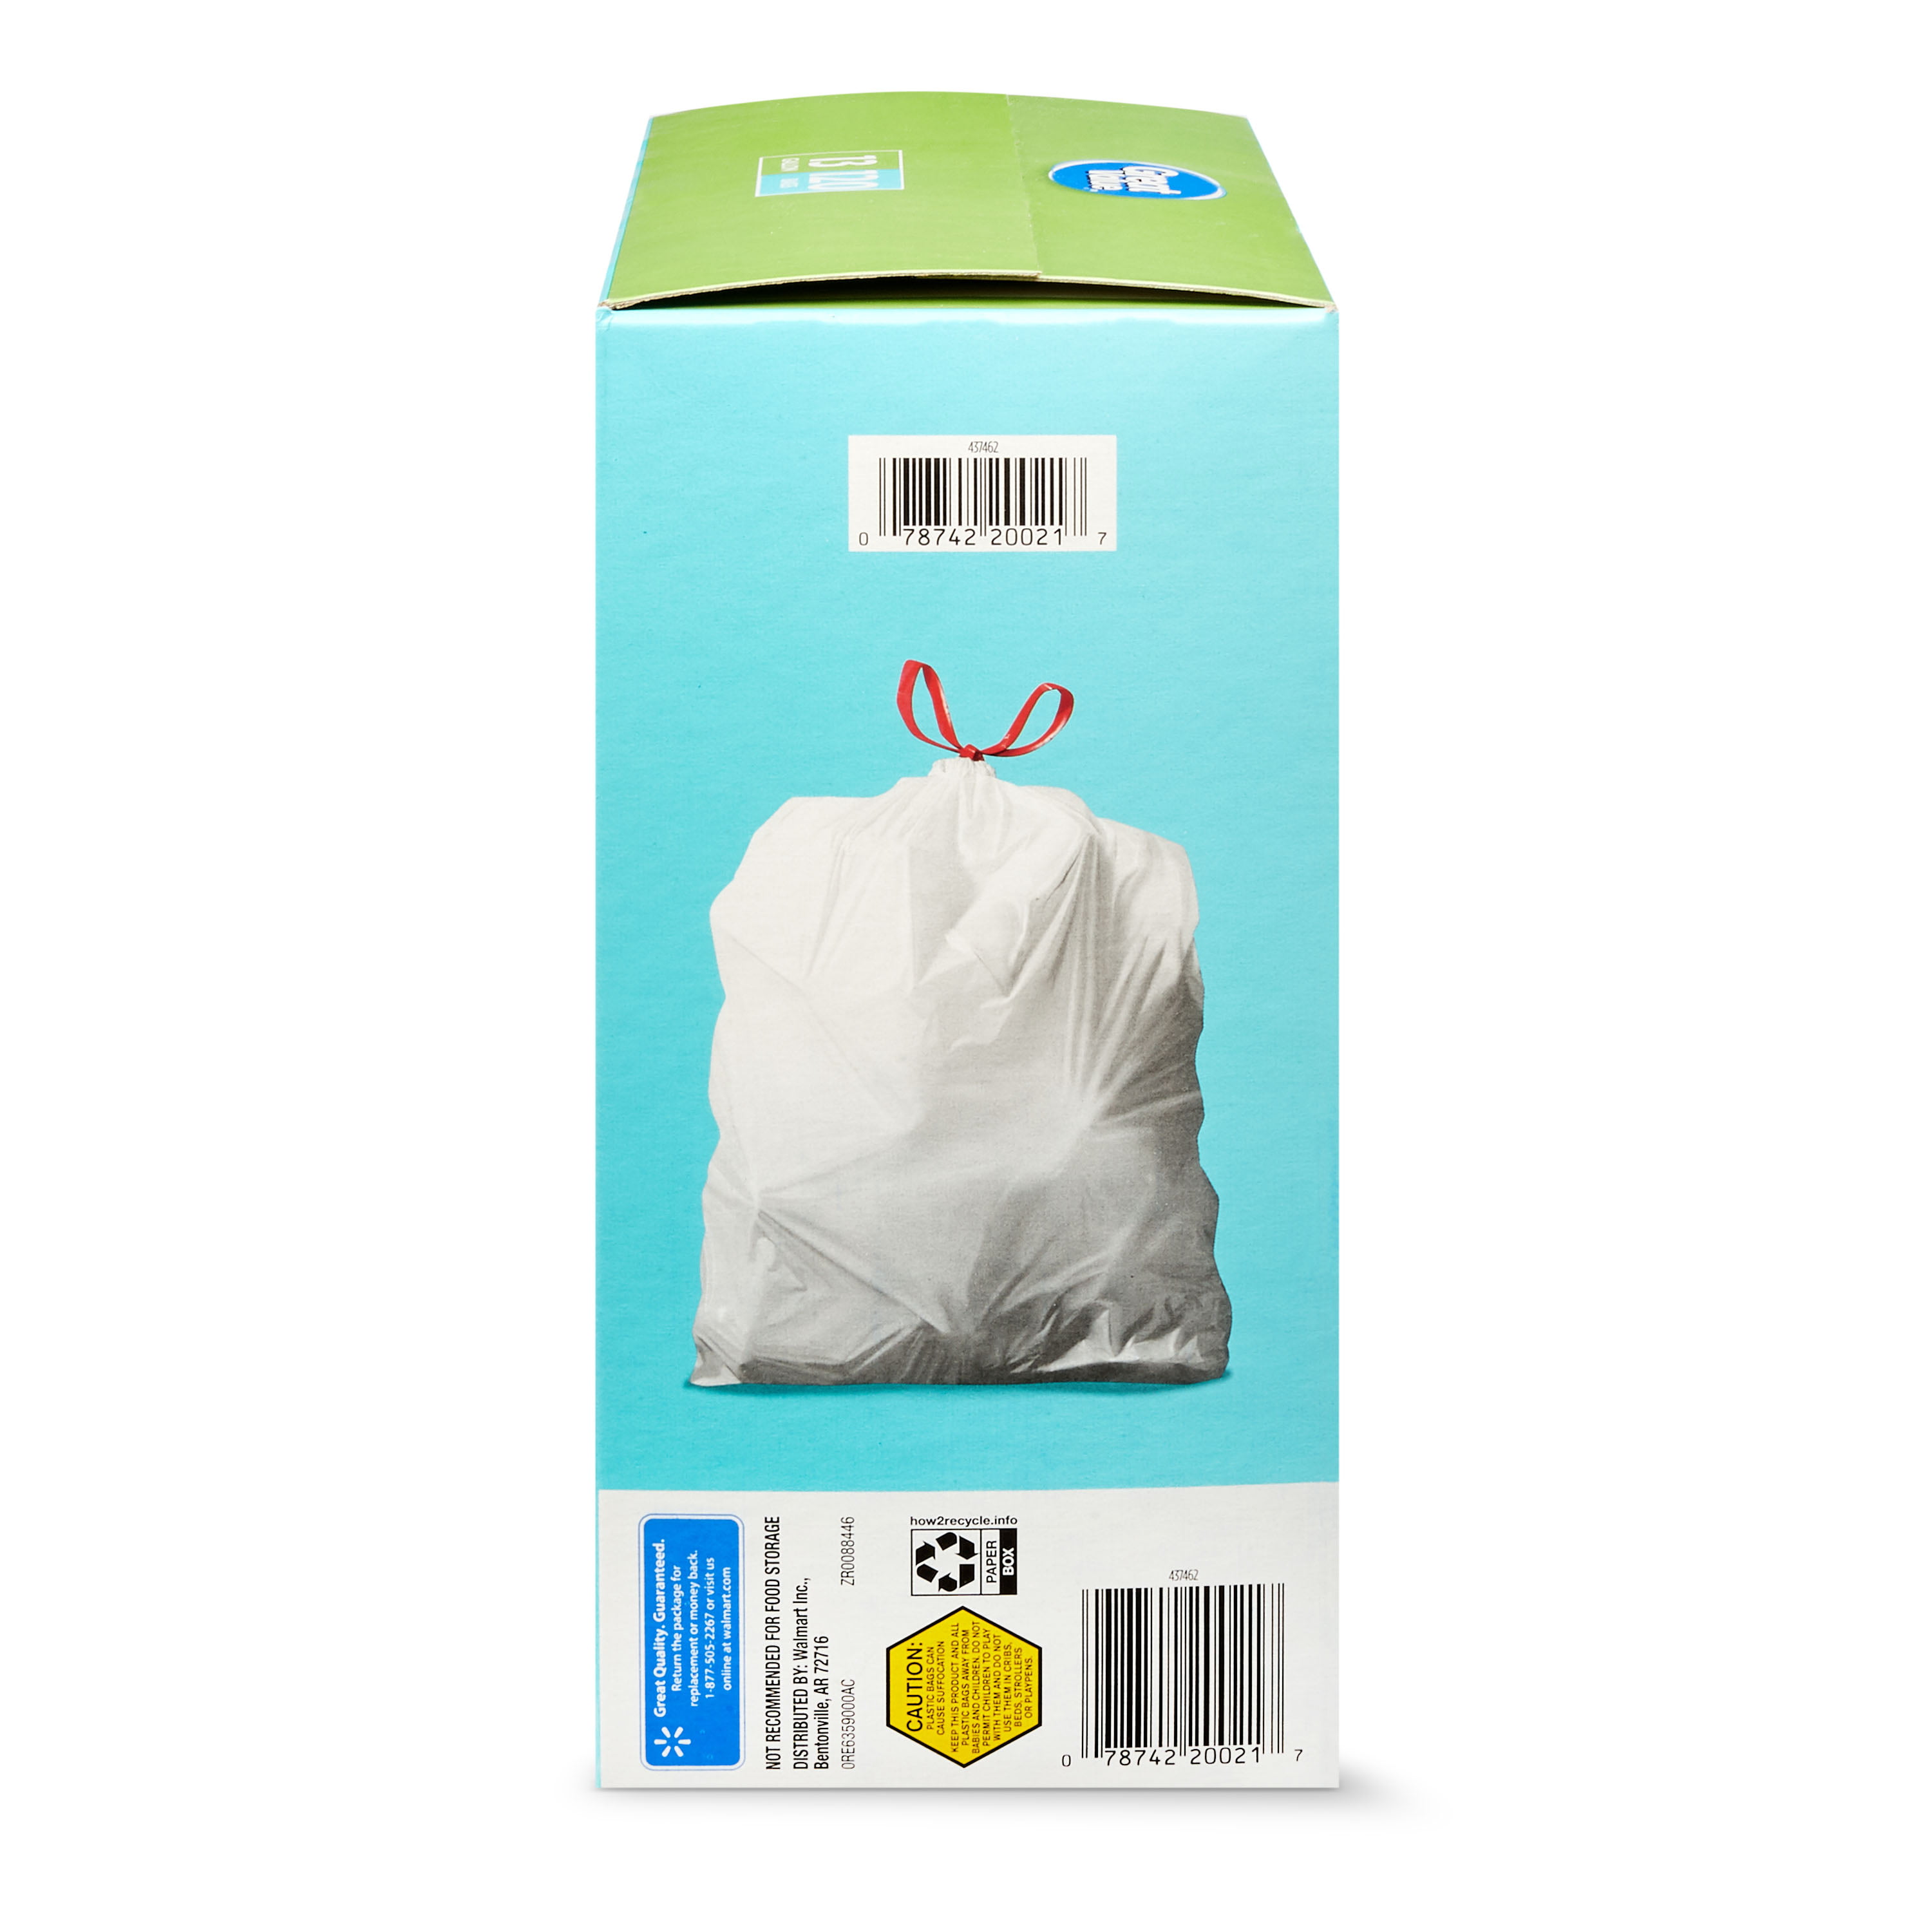 Trash Bags 13 Gallon Tall Kitchen Garbage Bags, Inwaysin Recycle Bags,  Biodegradable Black Trash Bags, 75ct